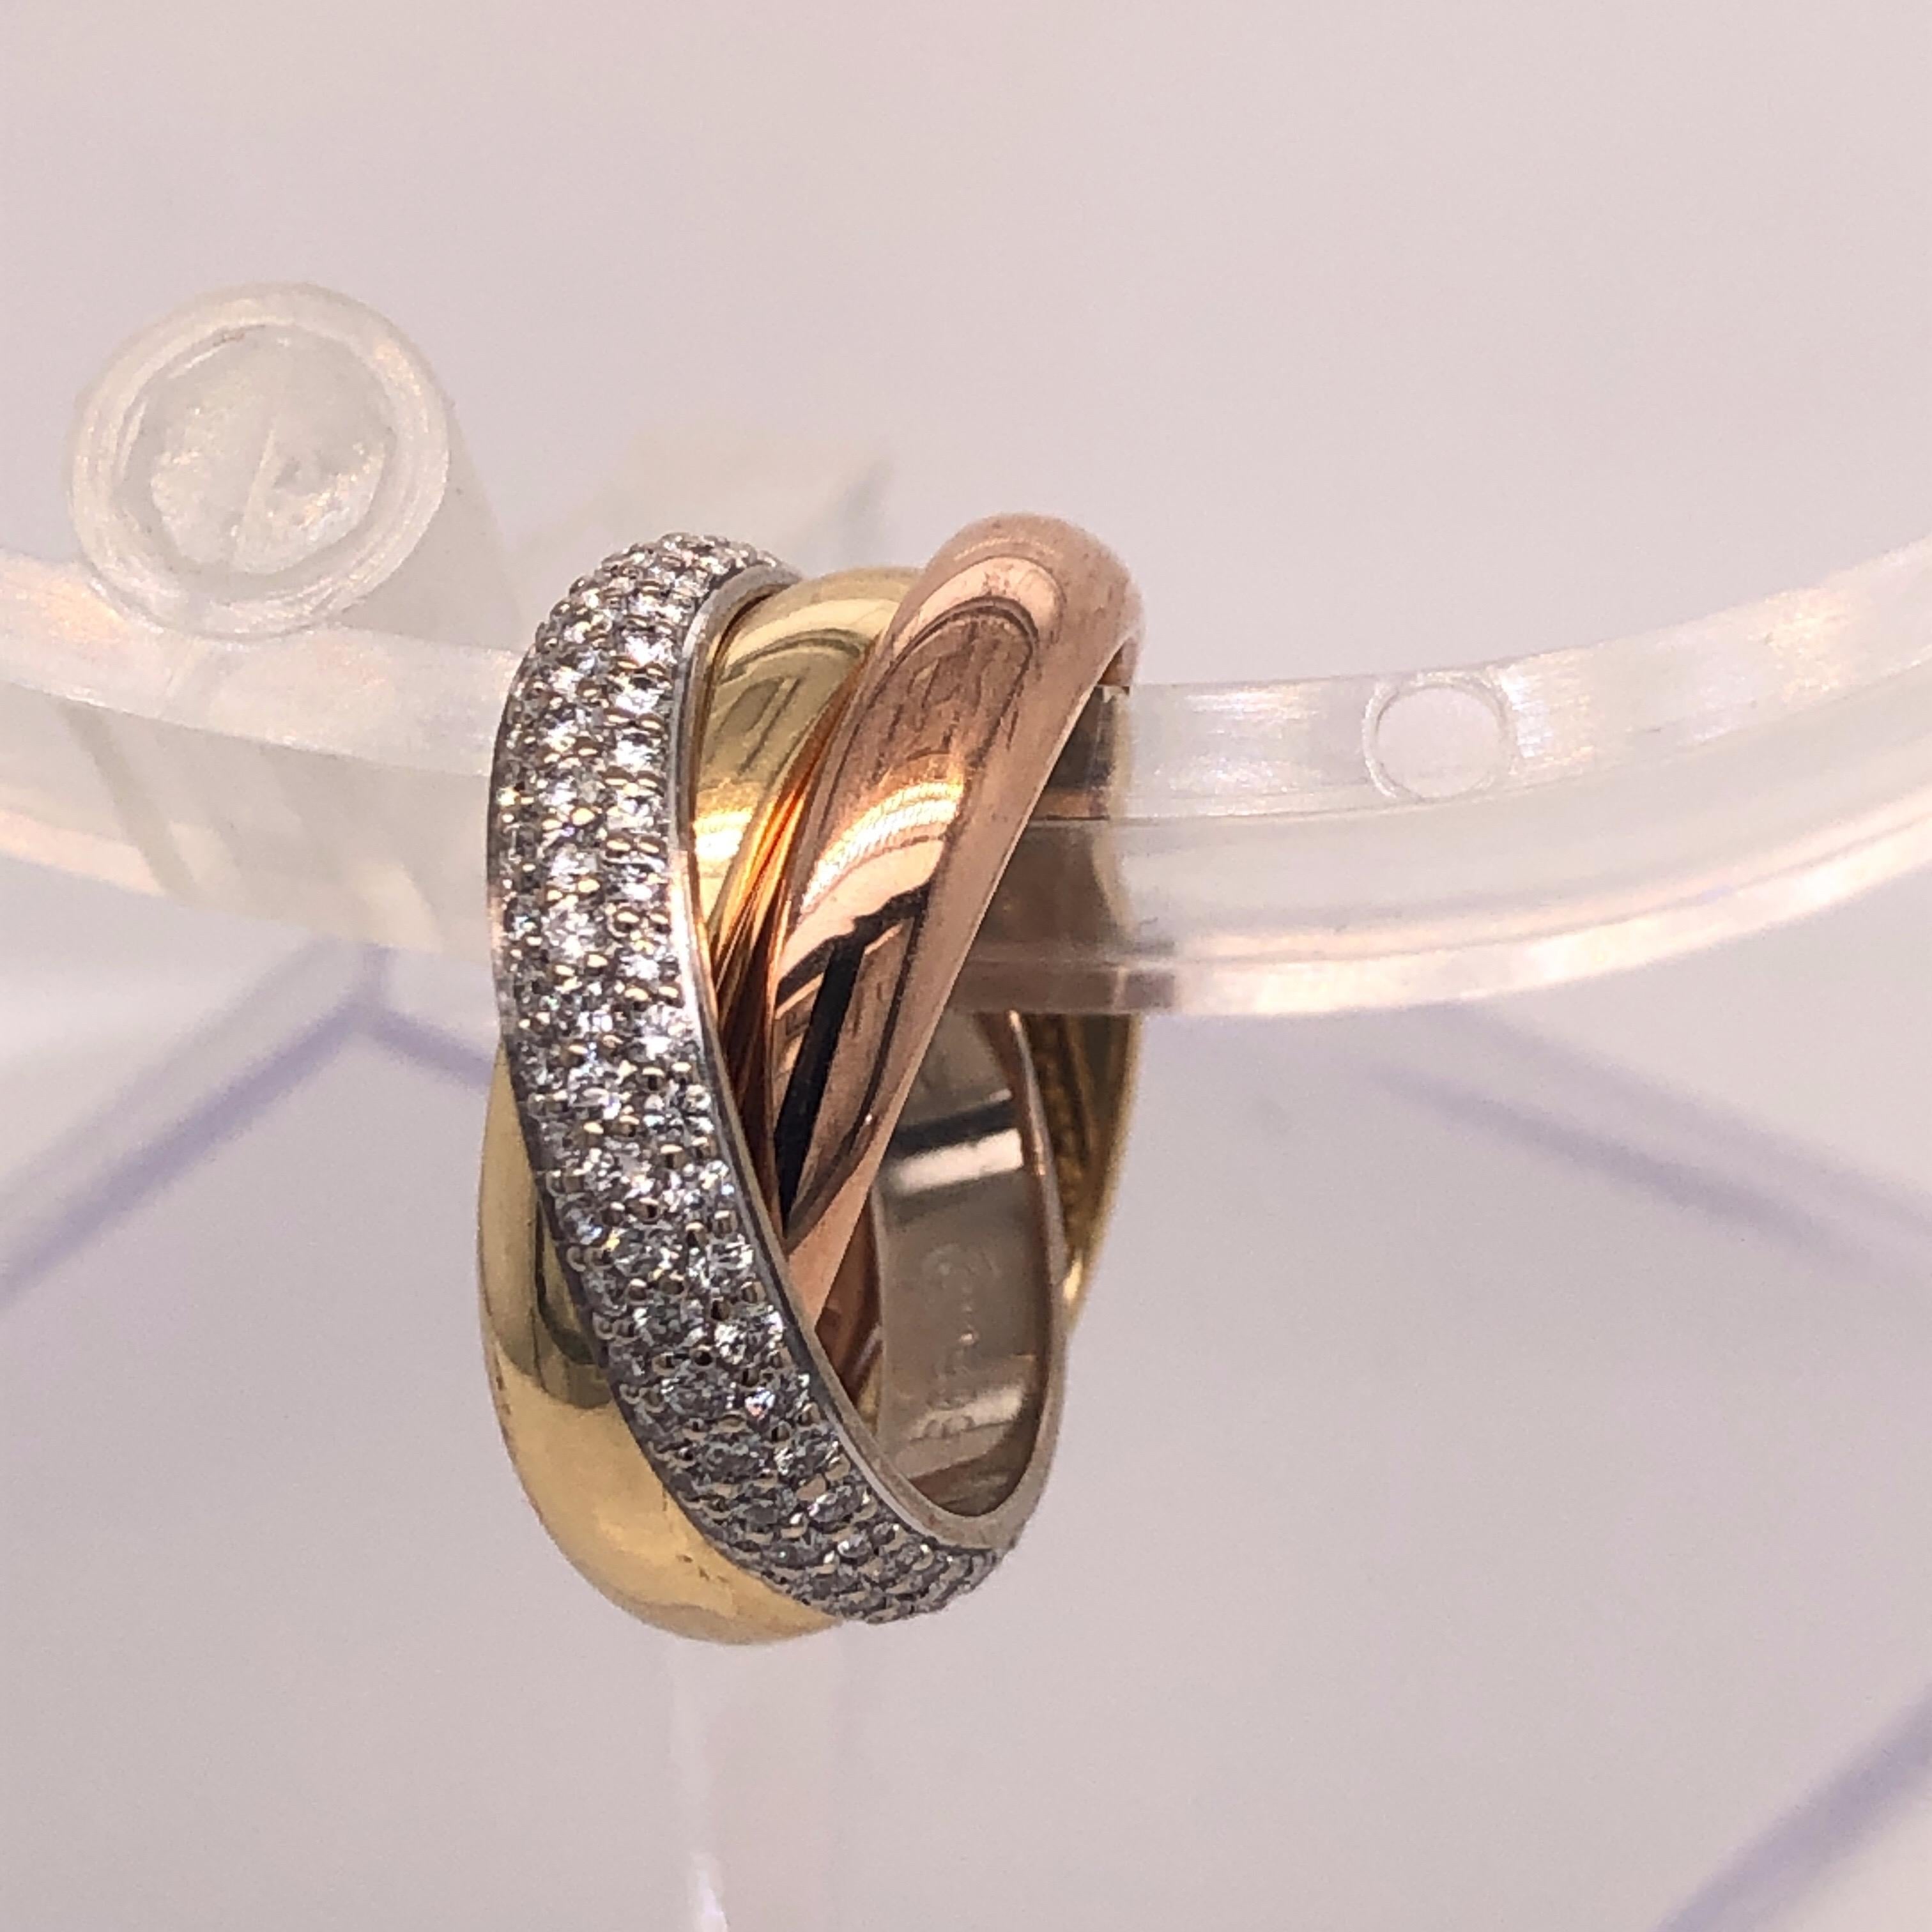 Cartier Trinity Ring with Pave Diamonds 18K White, Yellow and Rose Gold.   Size 4.5 and cannot be sized.  Mint Condition with Box and Papers.  Stamped Cartier. 